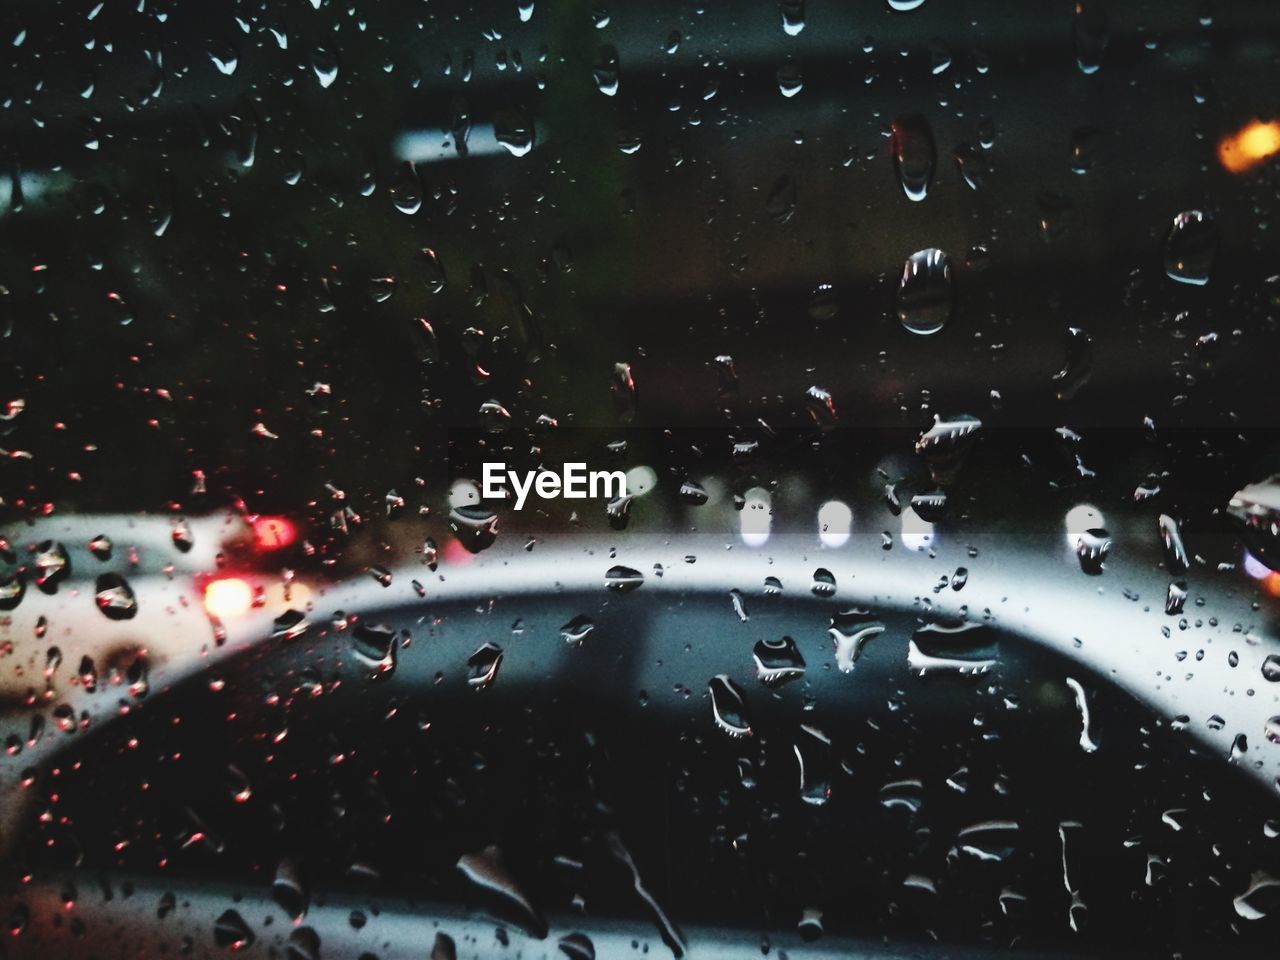 CLOSE-UP OF WATERDROPS ON WINDSHIELD OF CAR